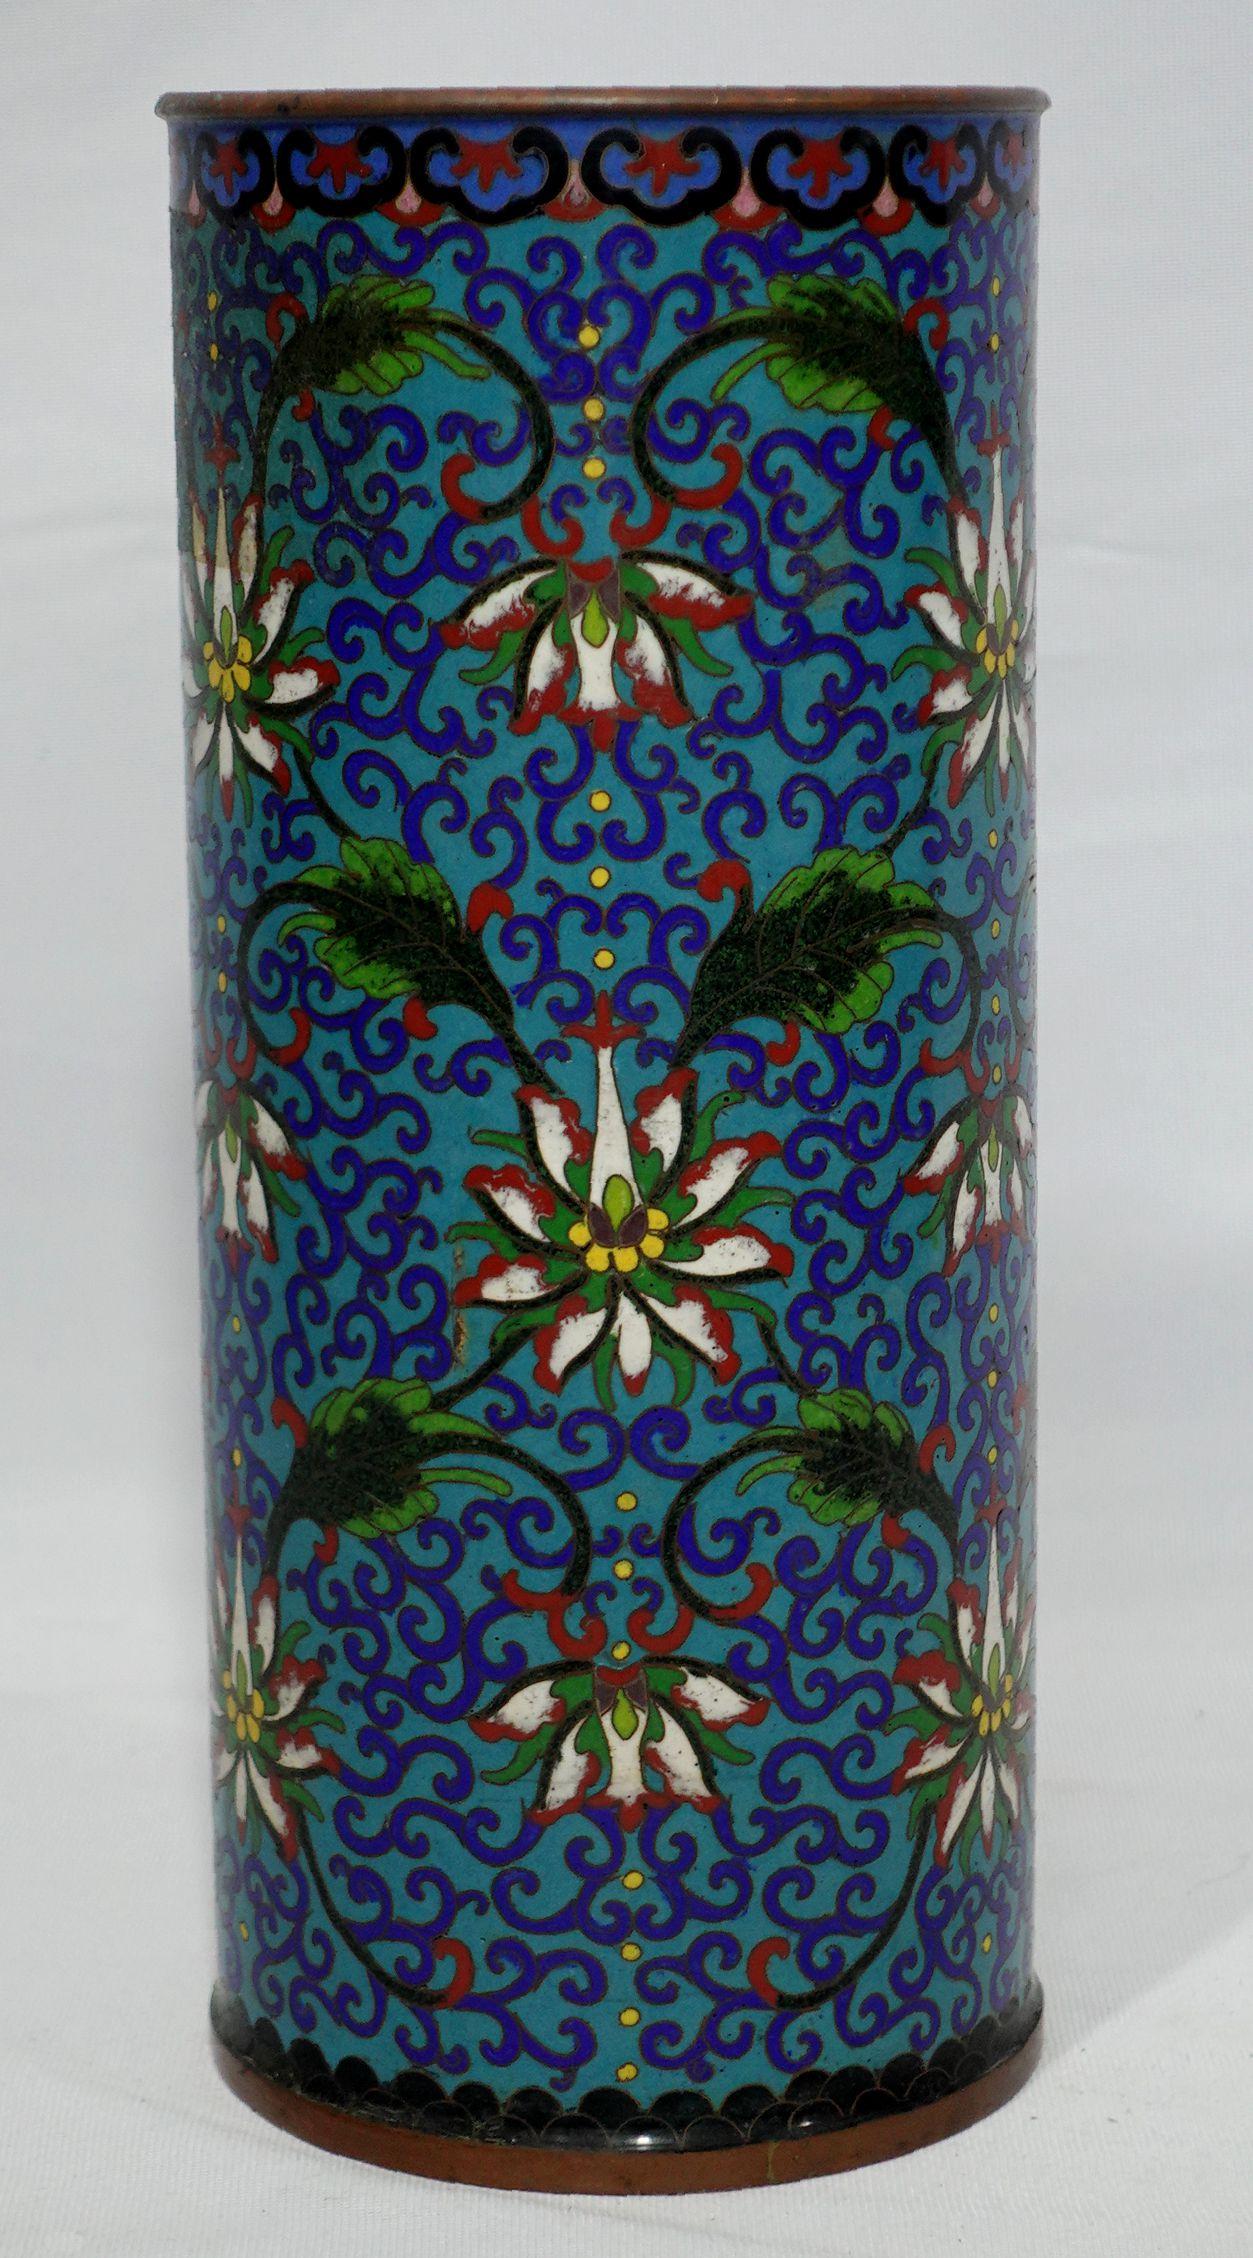 Quality work, a large Chinese Cloisonné Hat Vase depicting floral patterns all around the entire vase with vivid colors of yellow, green, red, blue, brown, red, and cyan base. Qianlong mark on the base.
